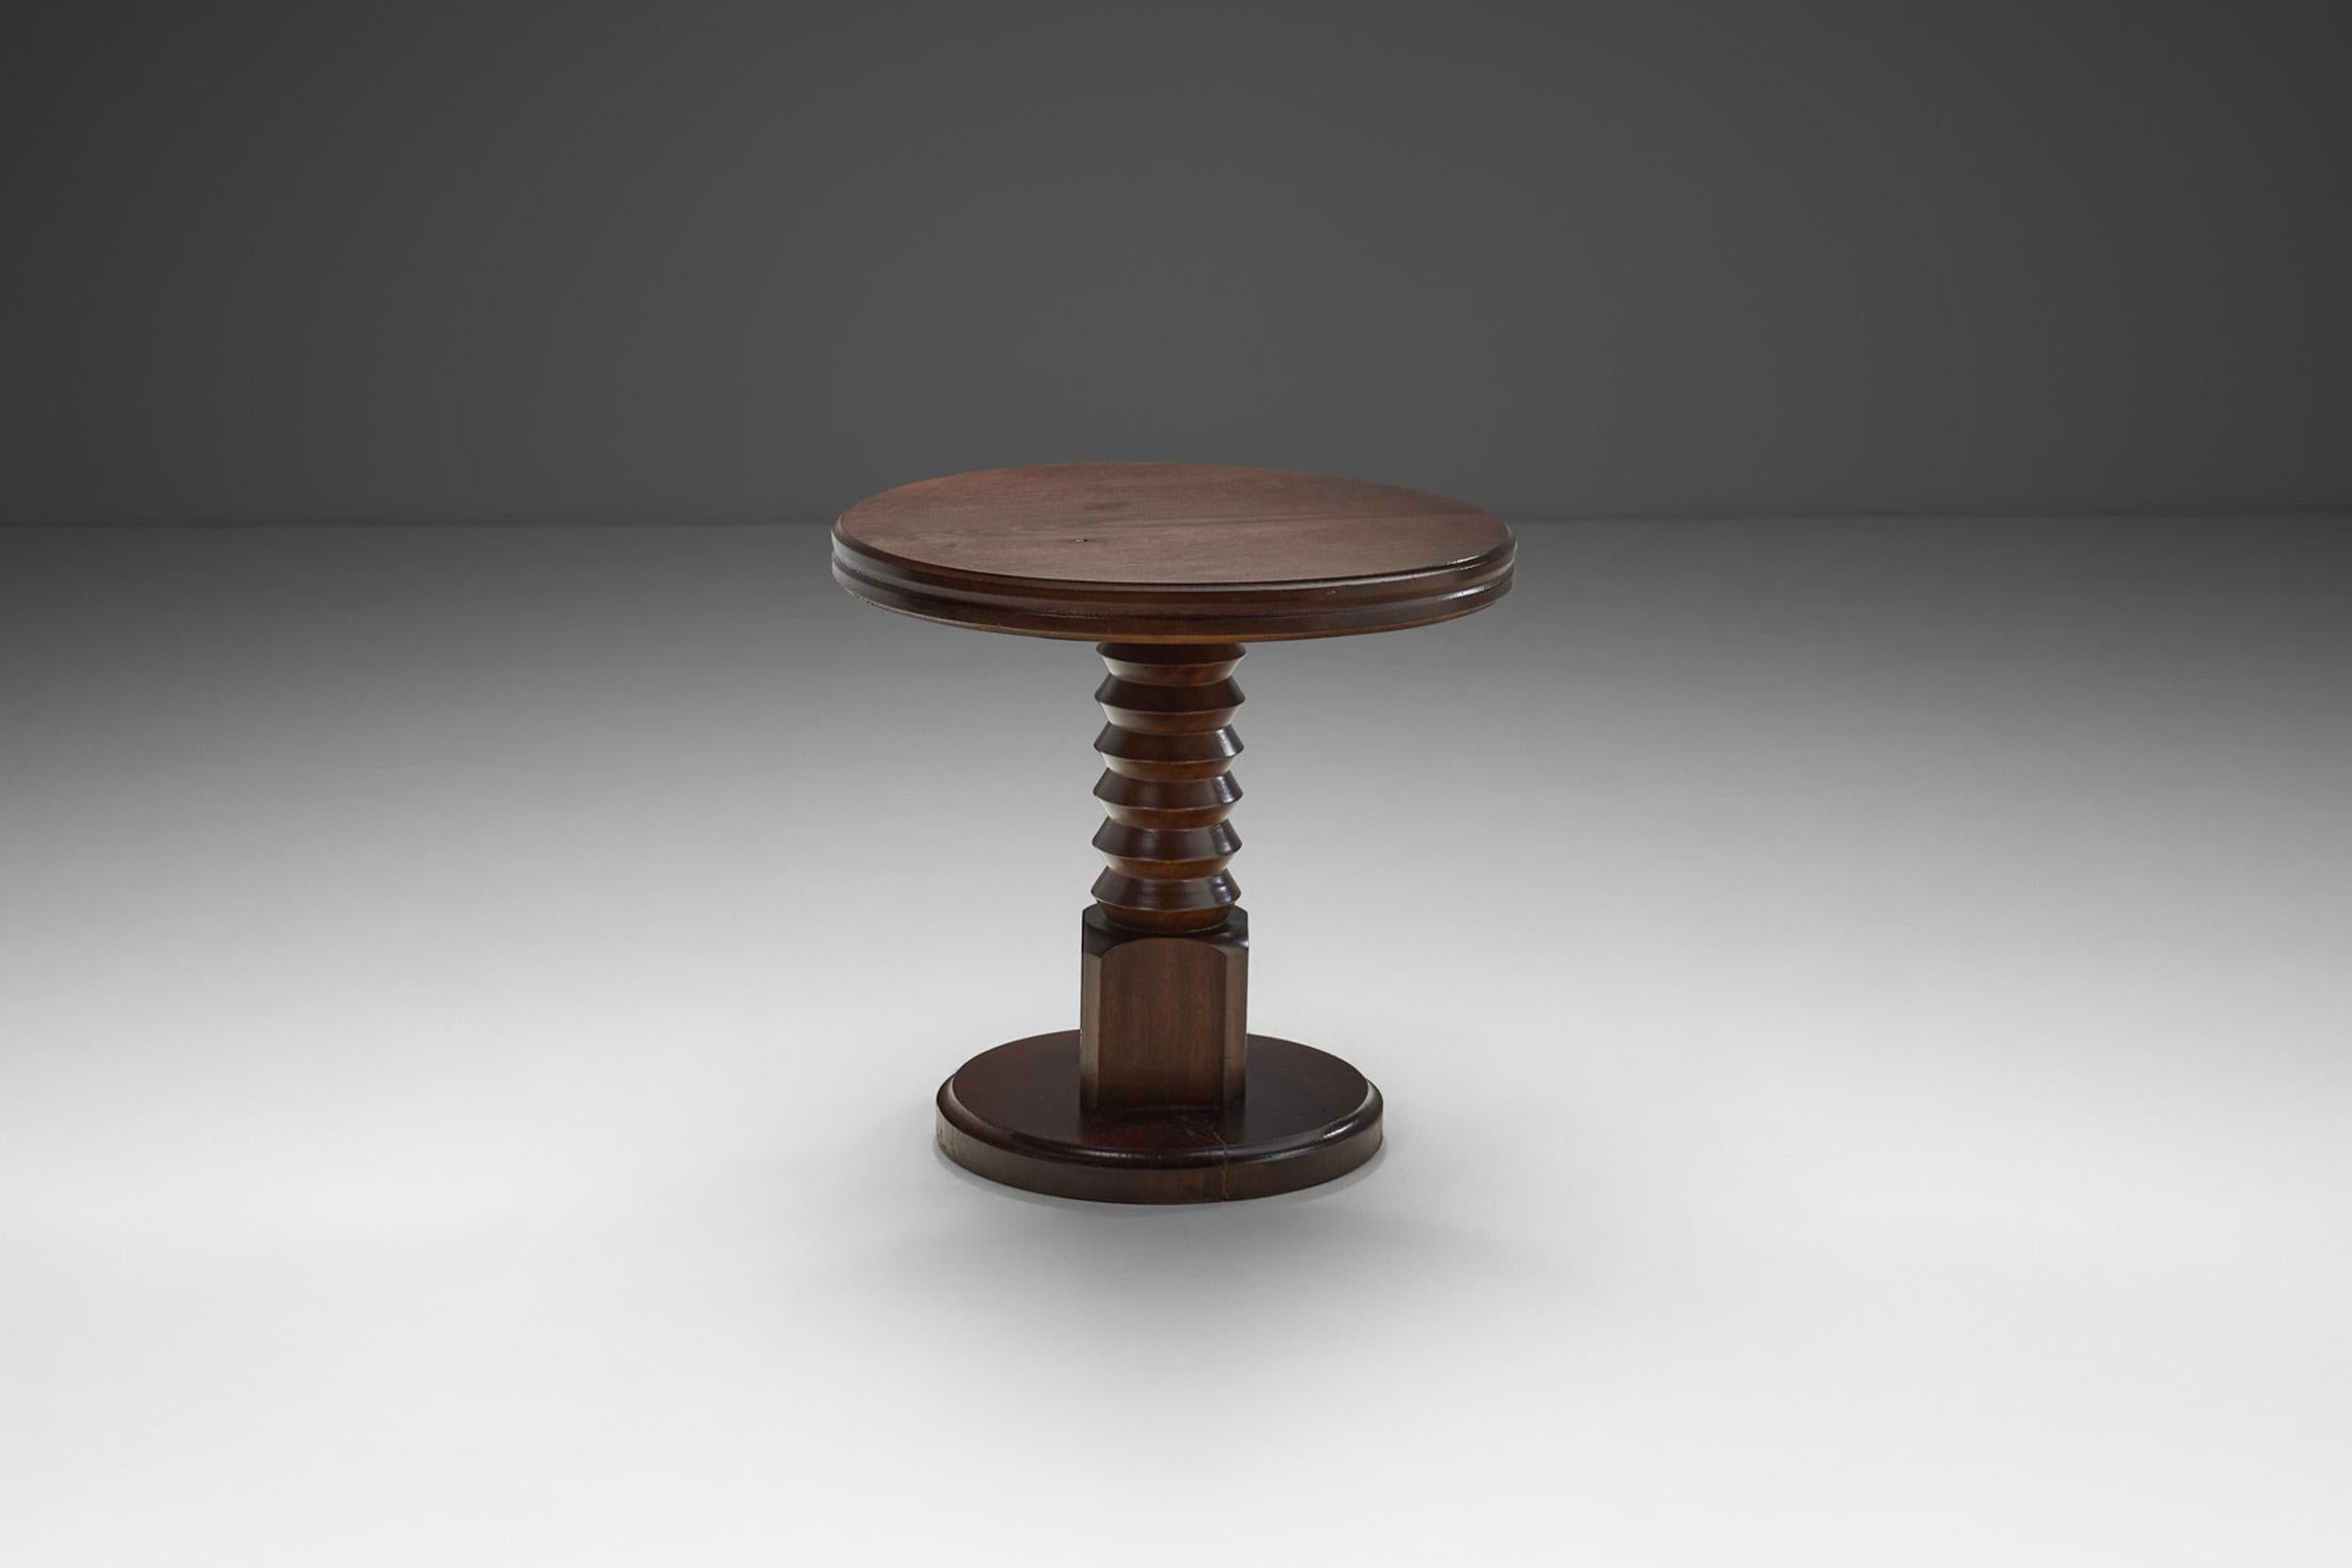 European Sculptural Solid Wood Side Table with Column Base, Europe ca 1940s For Sale